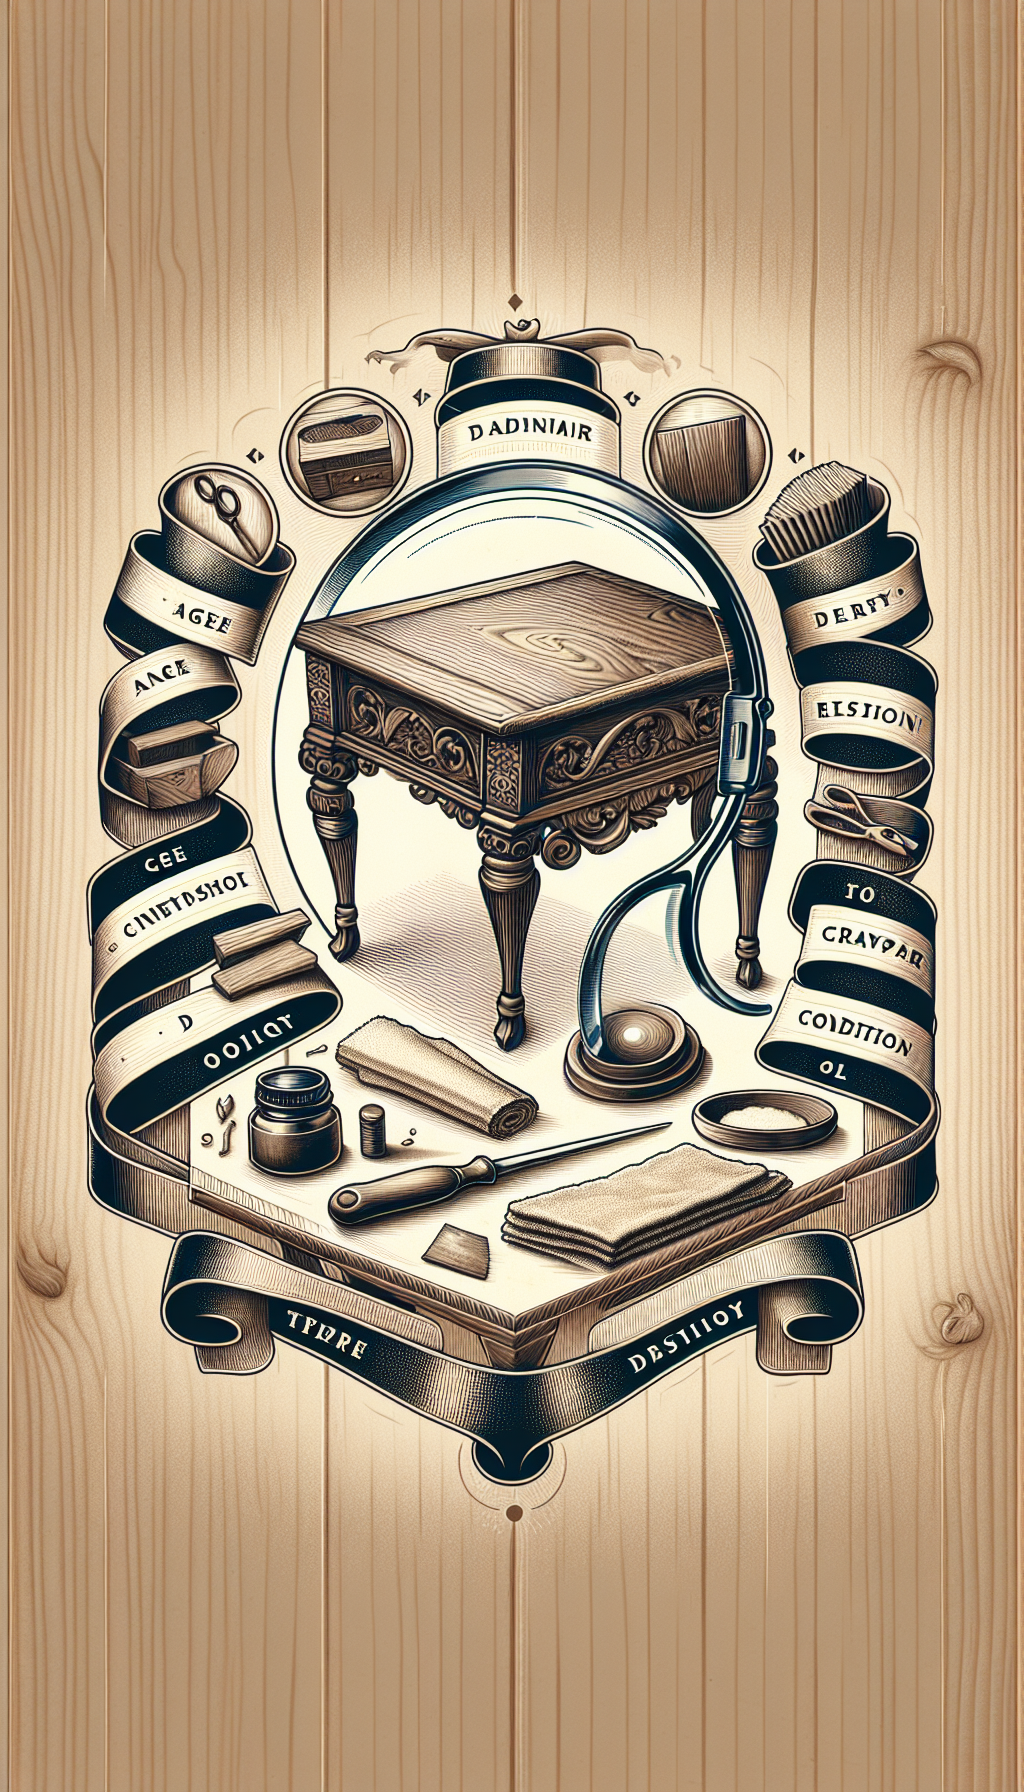 An illustration depicts a magnifying glass hovering over a meticulously detailed antique table, revealing fine wood grains, distinct carvings, and dovetail joints. Vintage care tools like a soft cloth, wax, and oil rest beside it. Intertwined around the table’s legs, a ribbon showcases words like "age," "origin," "craftsmanship," and "condition," symbolizing key appraisal factors.